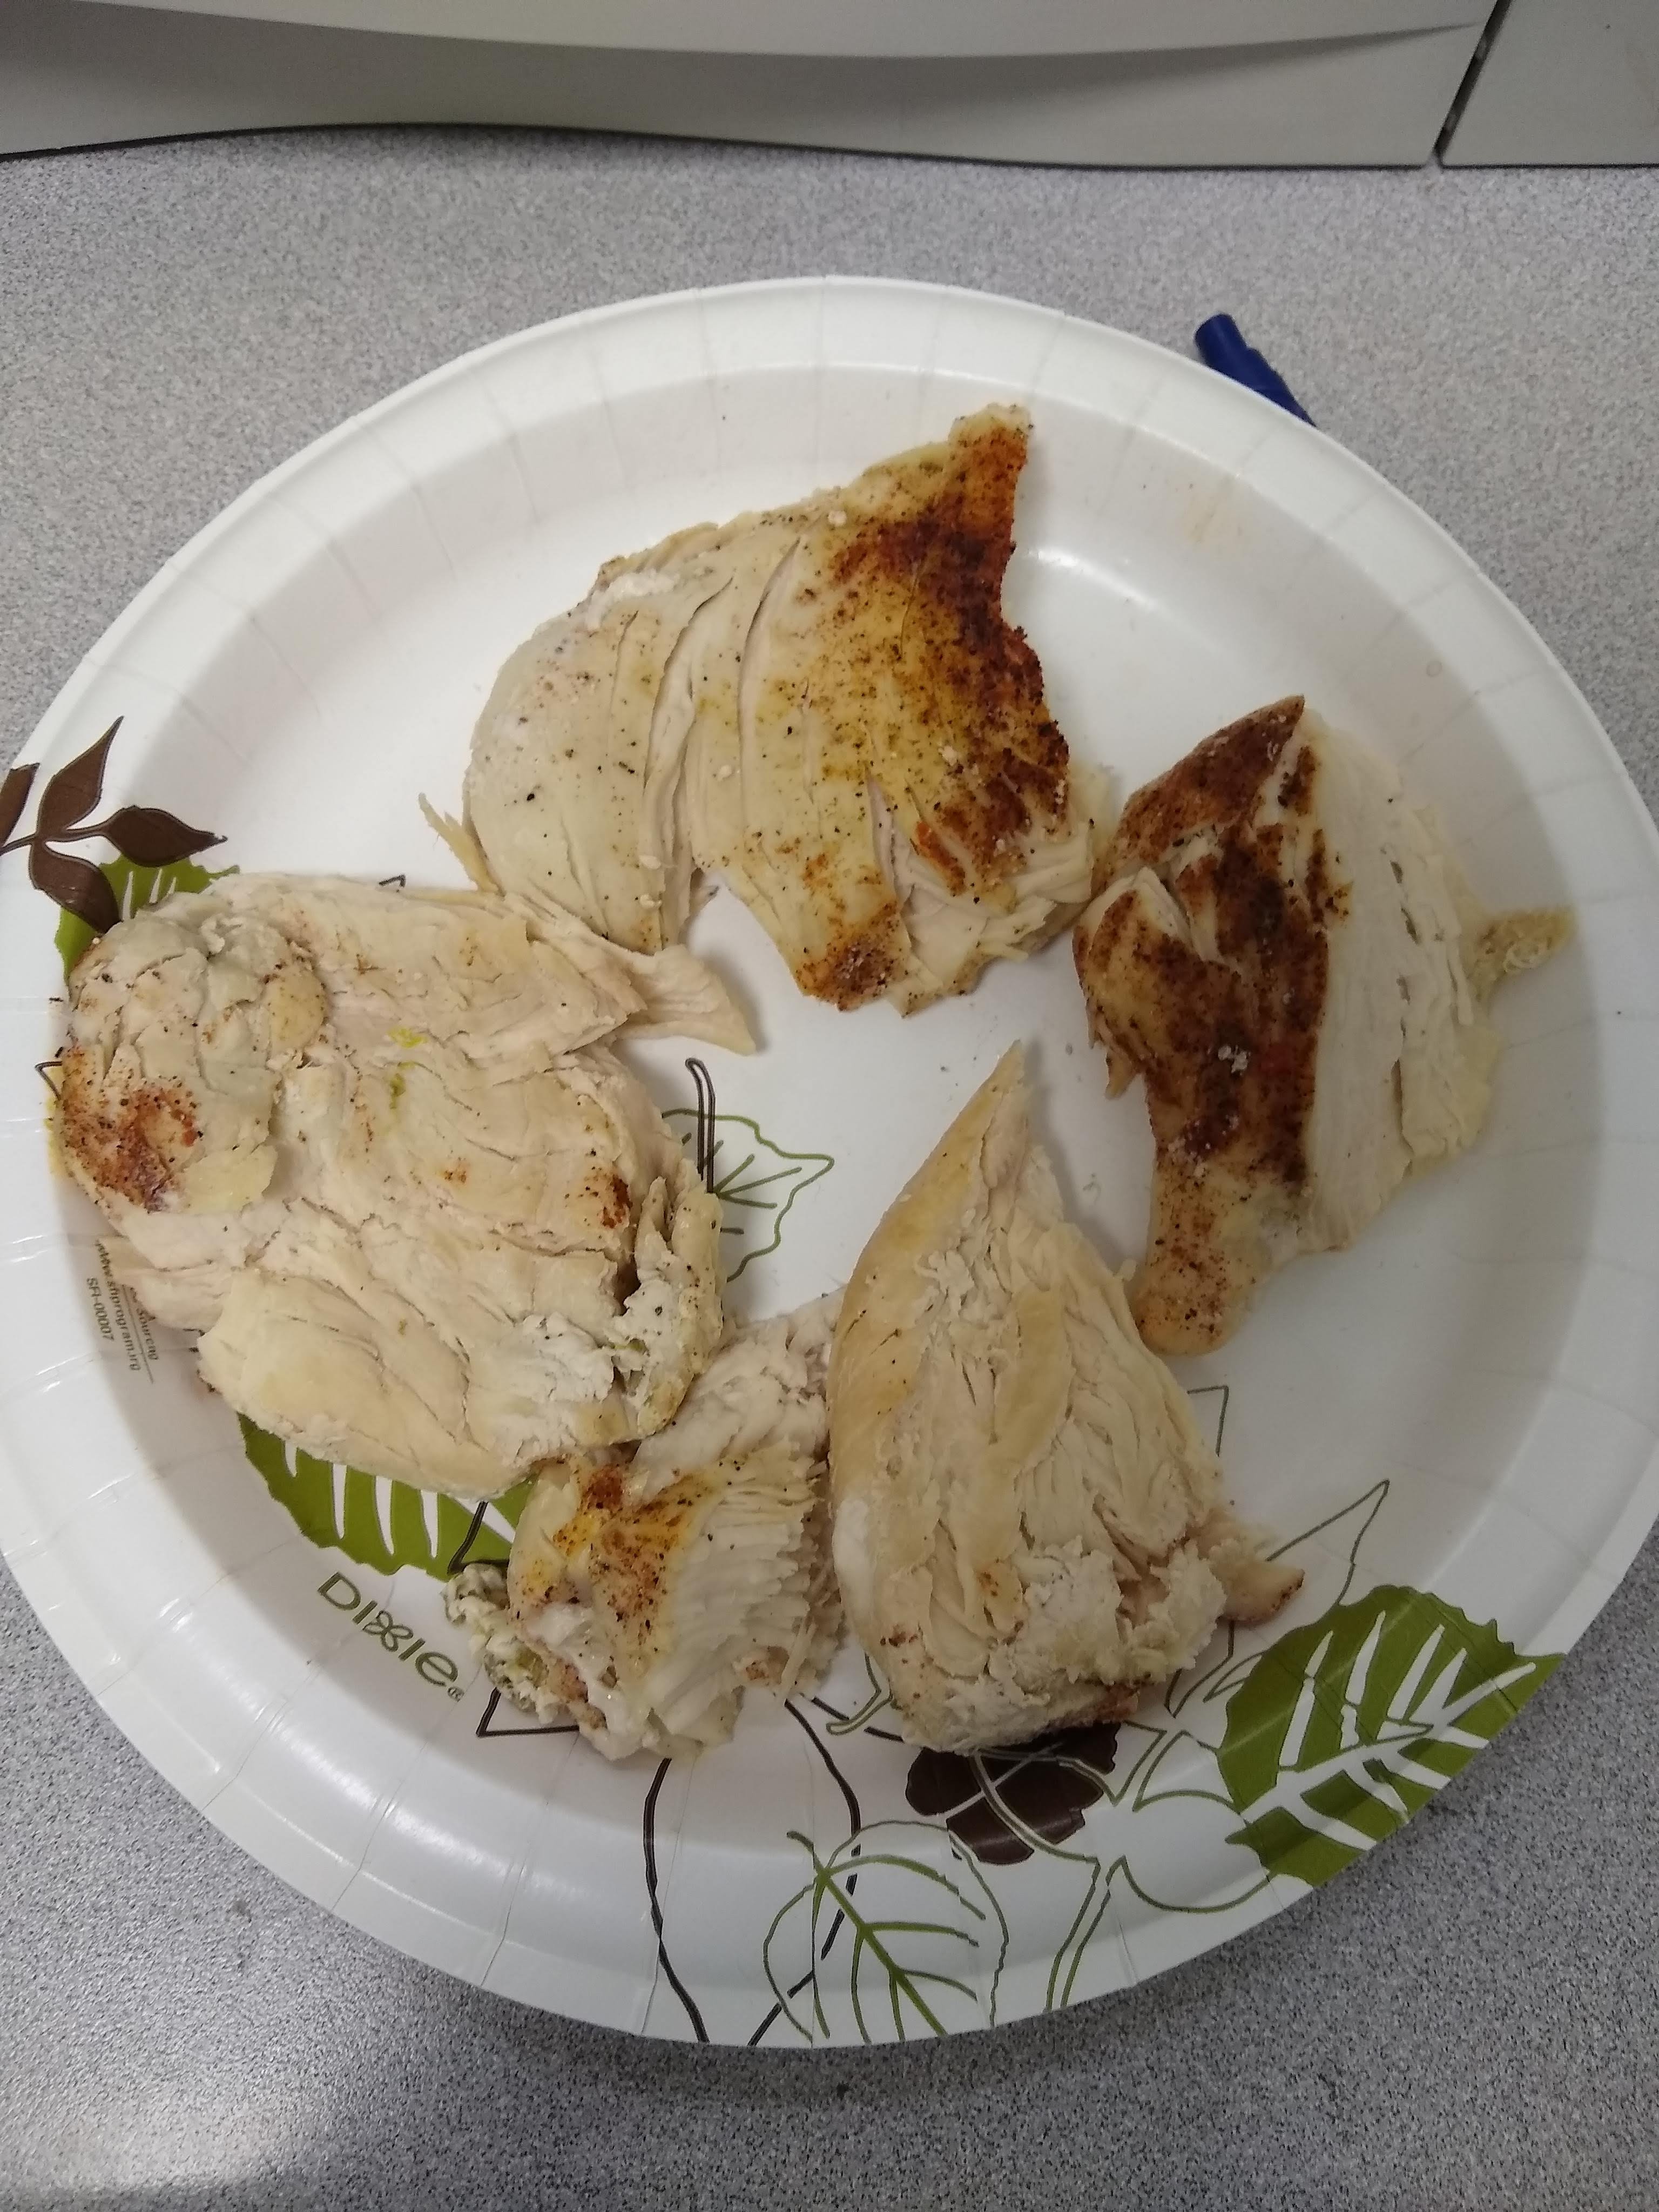 fully cooked and seasoned chicken breast on a paper plate that have been smashed with a human fist.